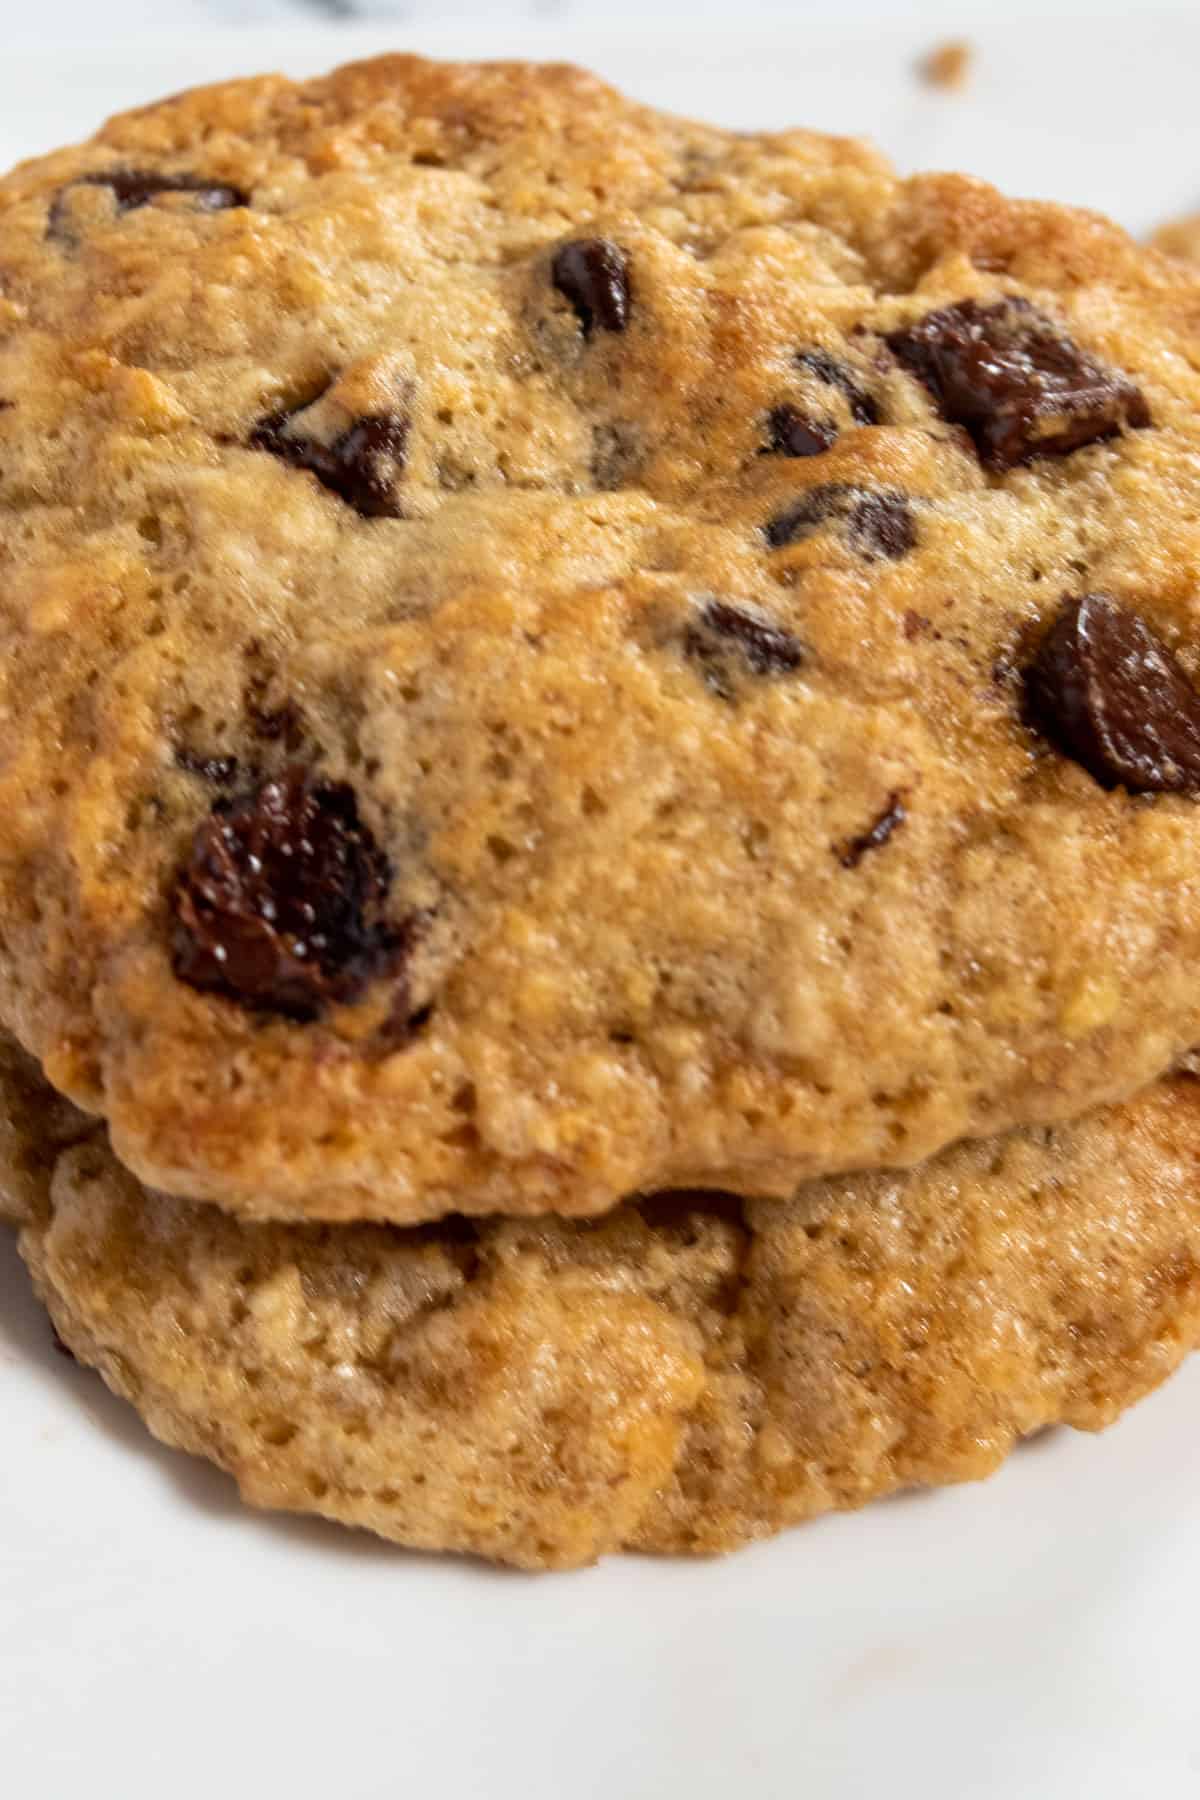 A close up shot of two vegan banana chocolate chip cookies, stacked. The chocolate chips on top look melty.